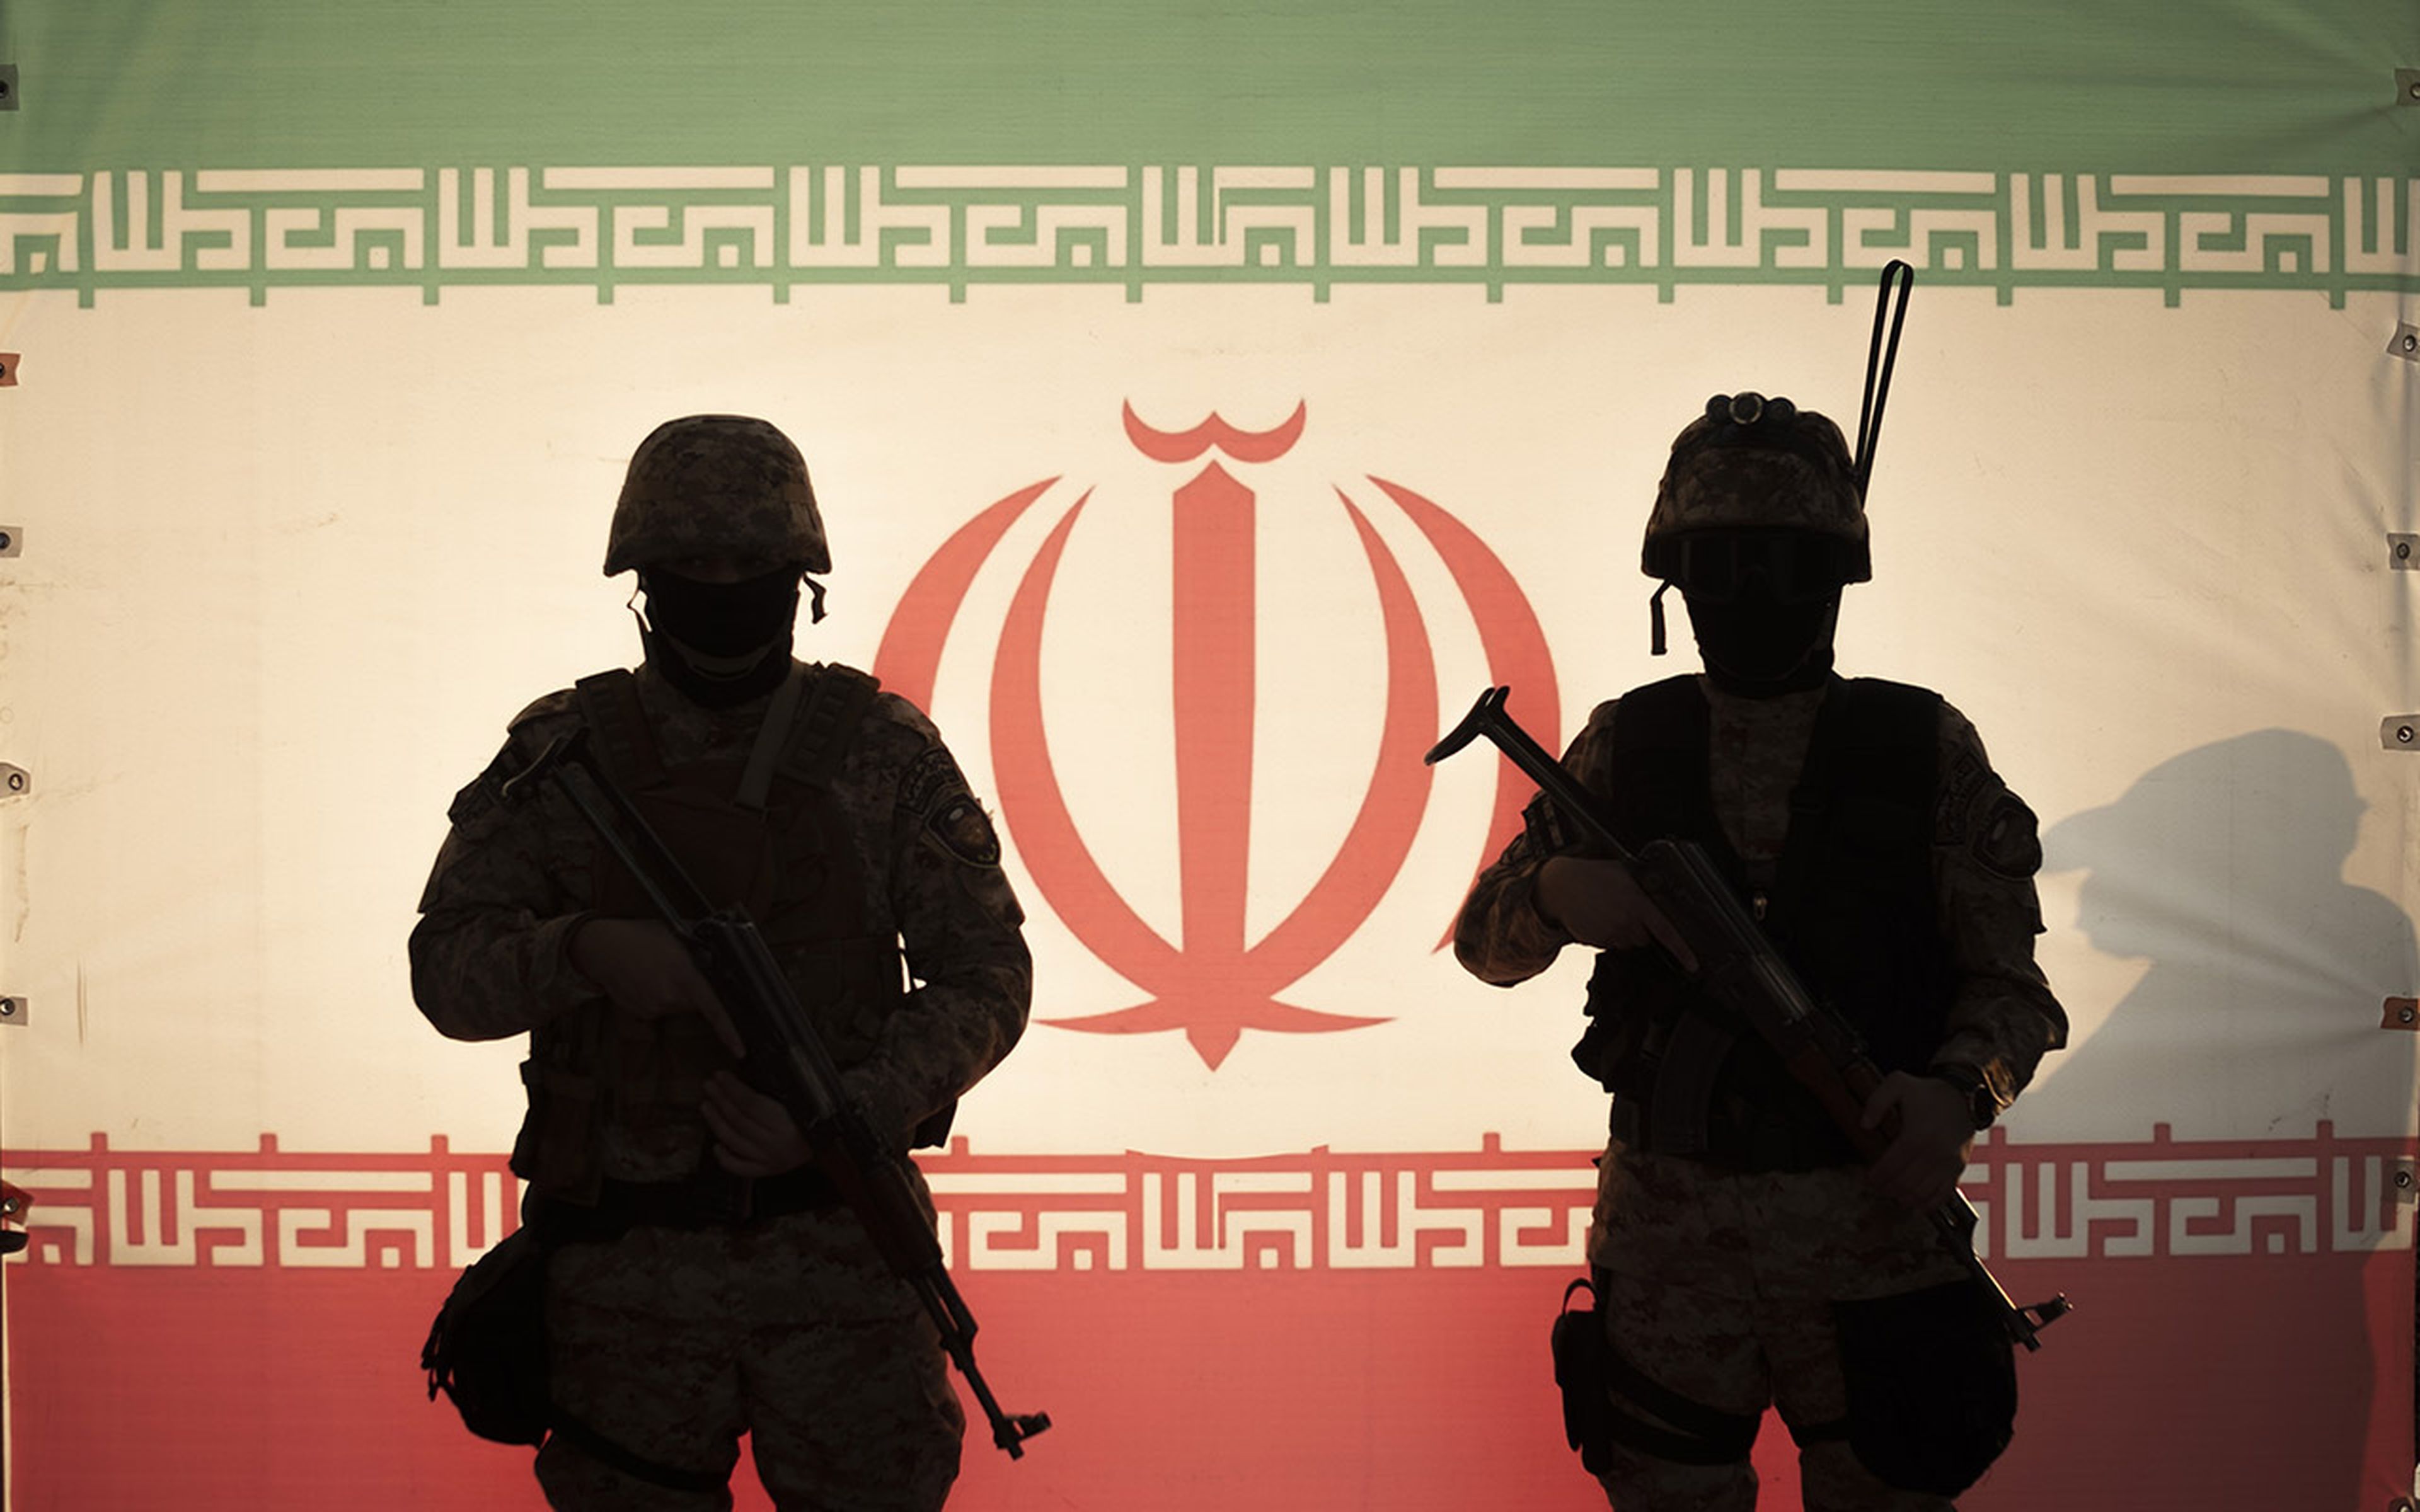 Armed military personnel stand in front of the Iranian flag